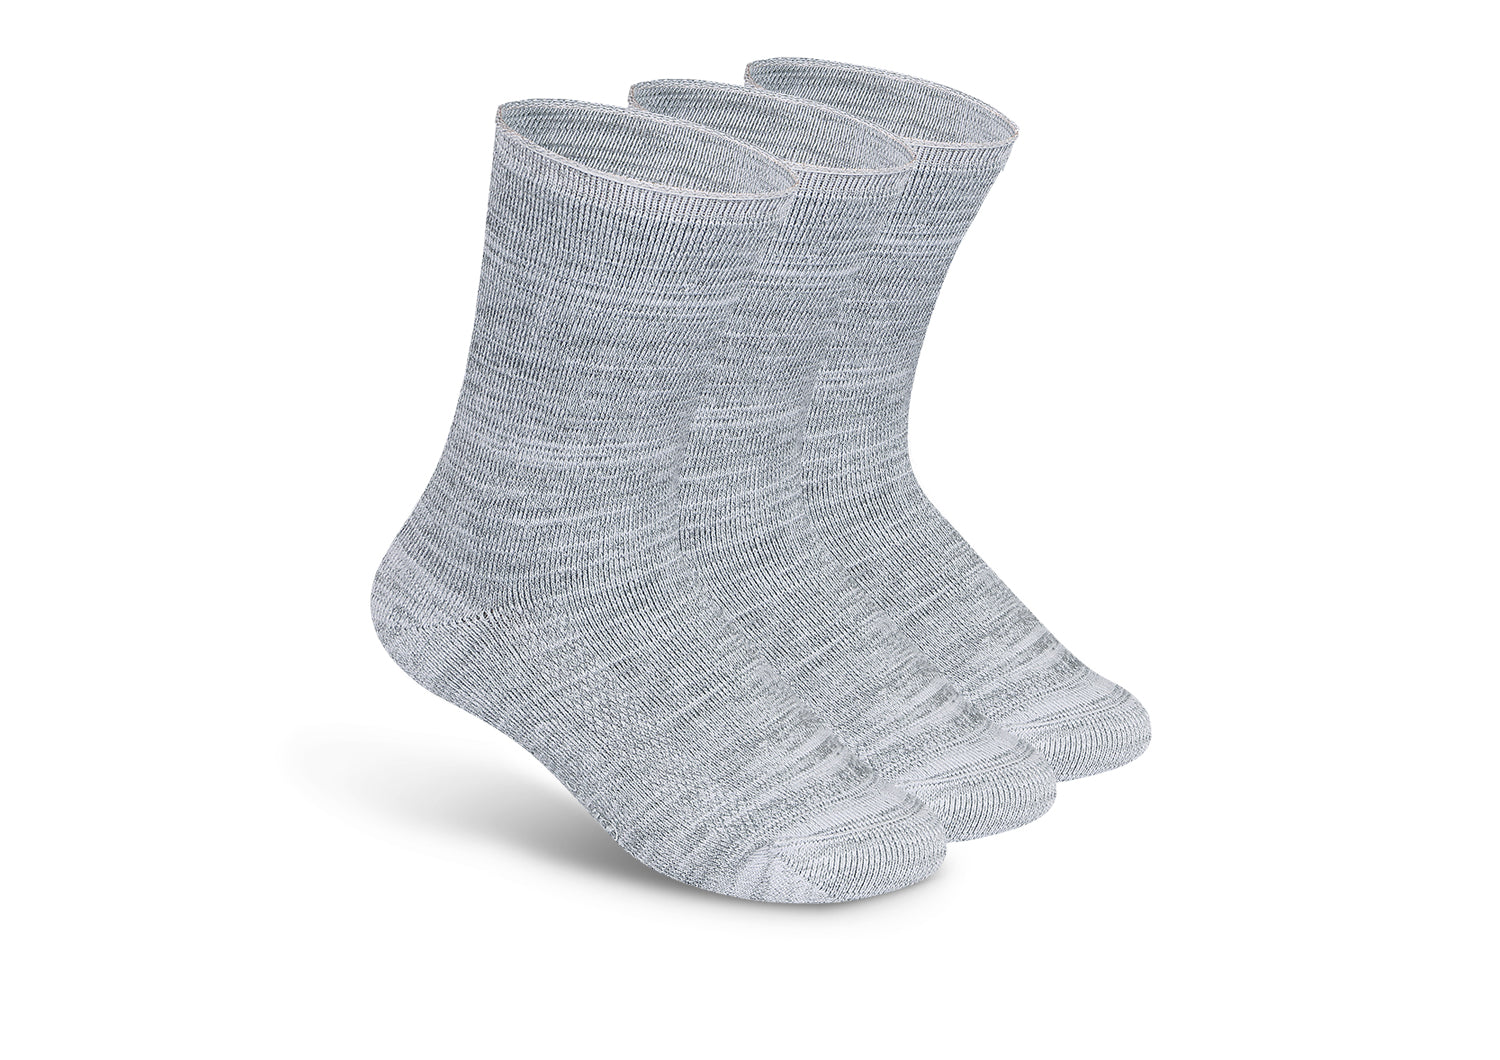 extra wide socks products for sale